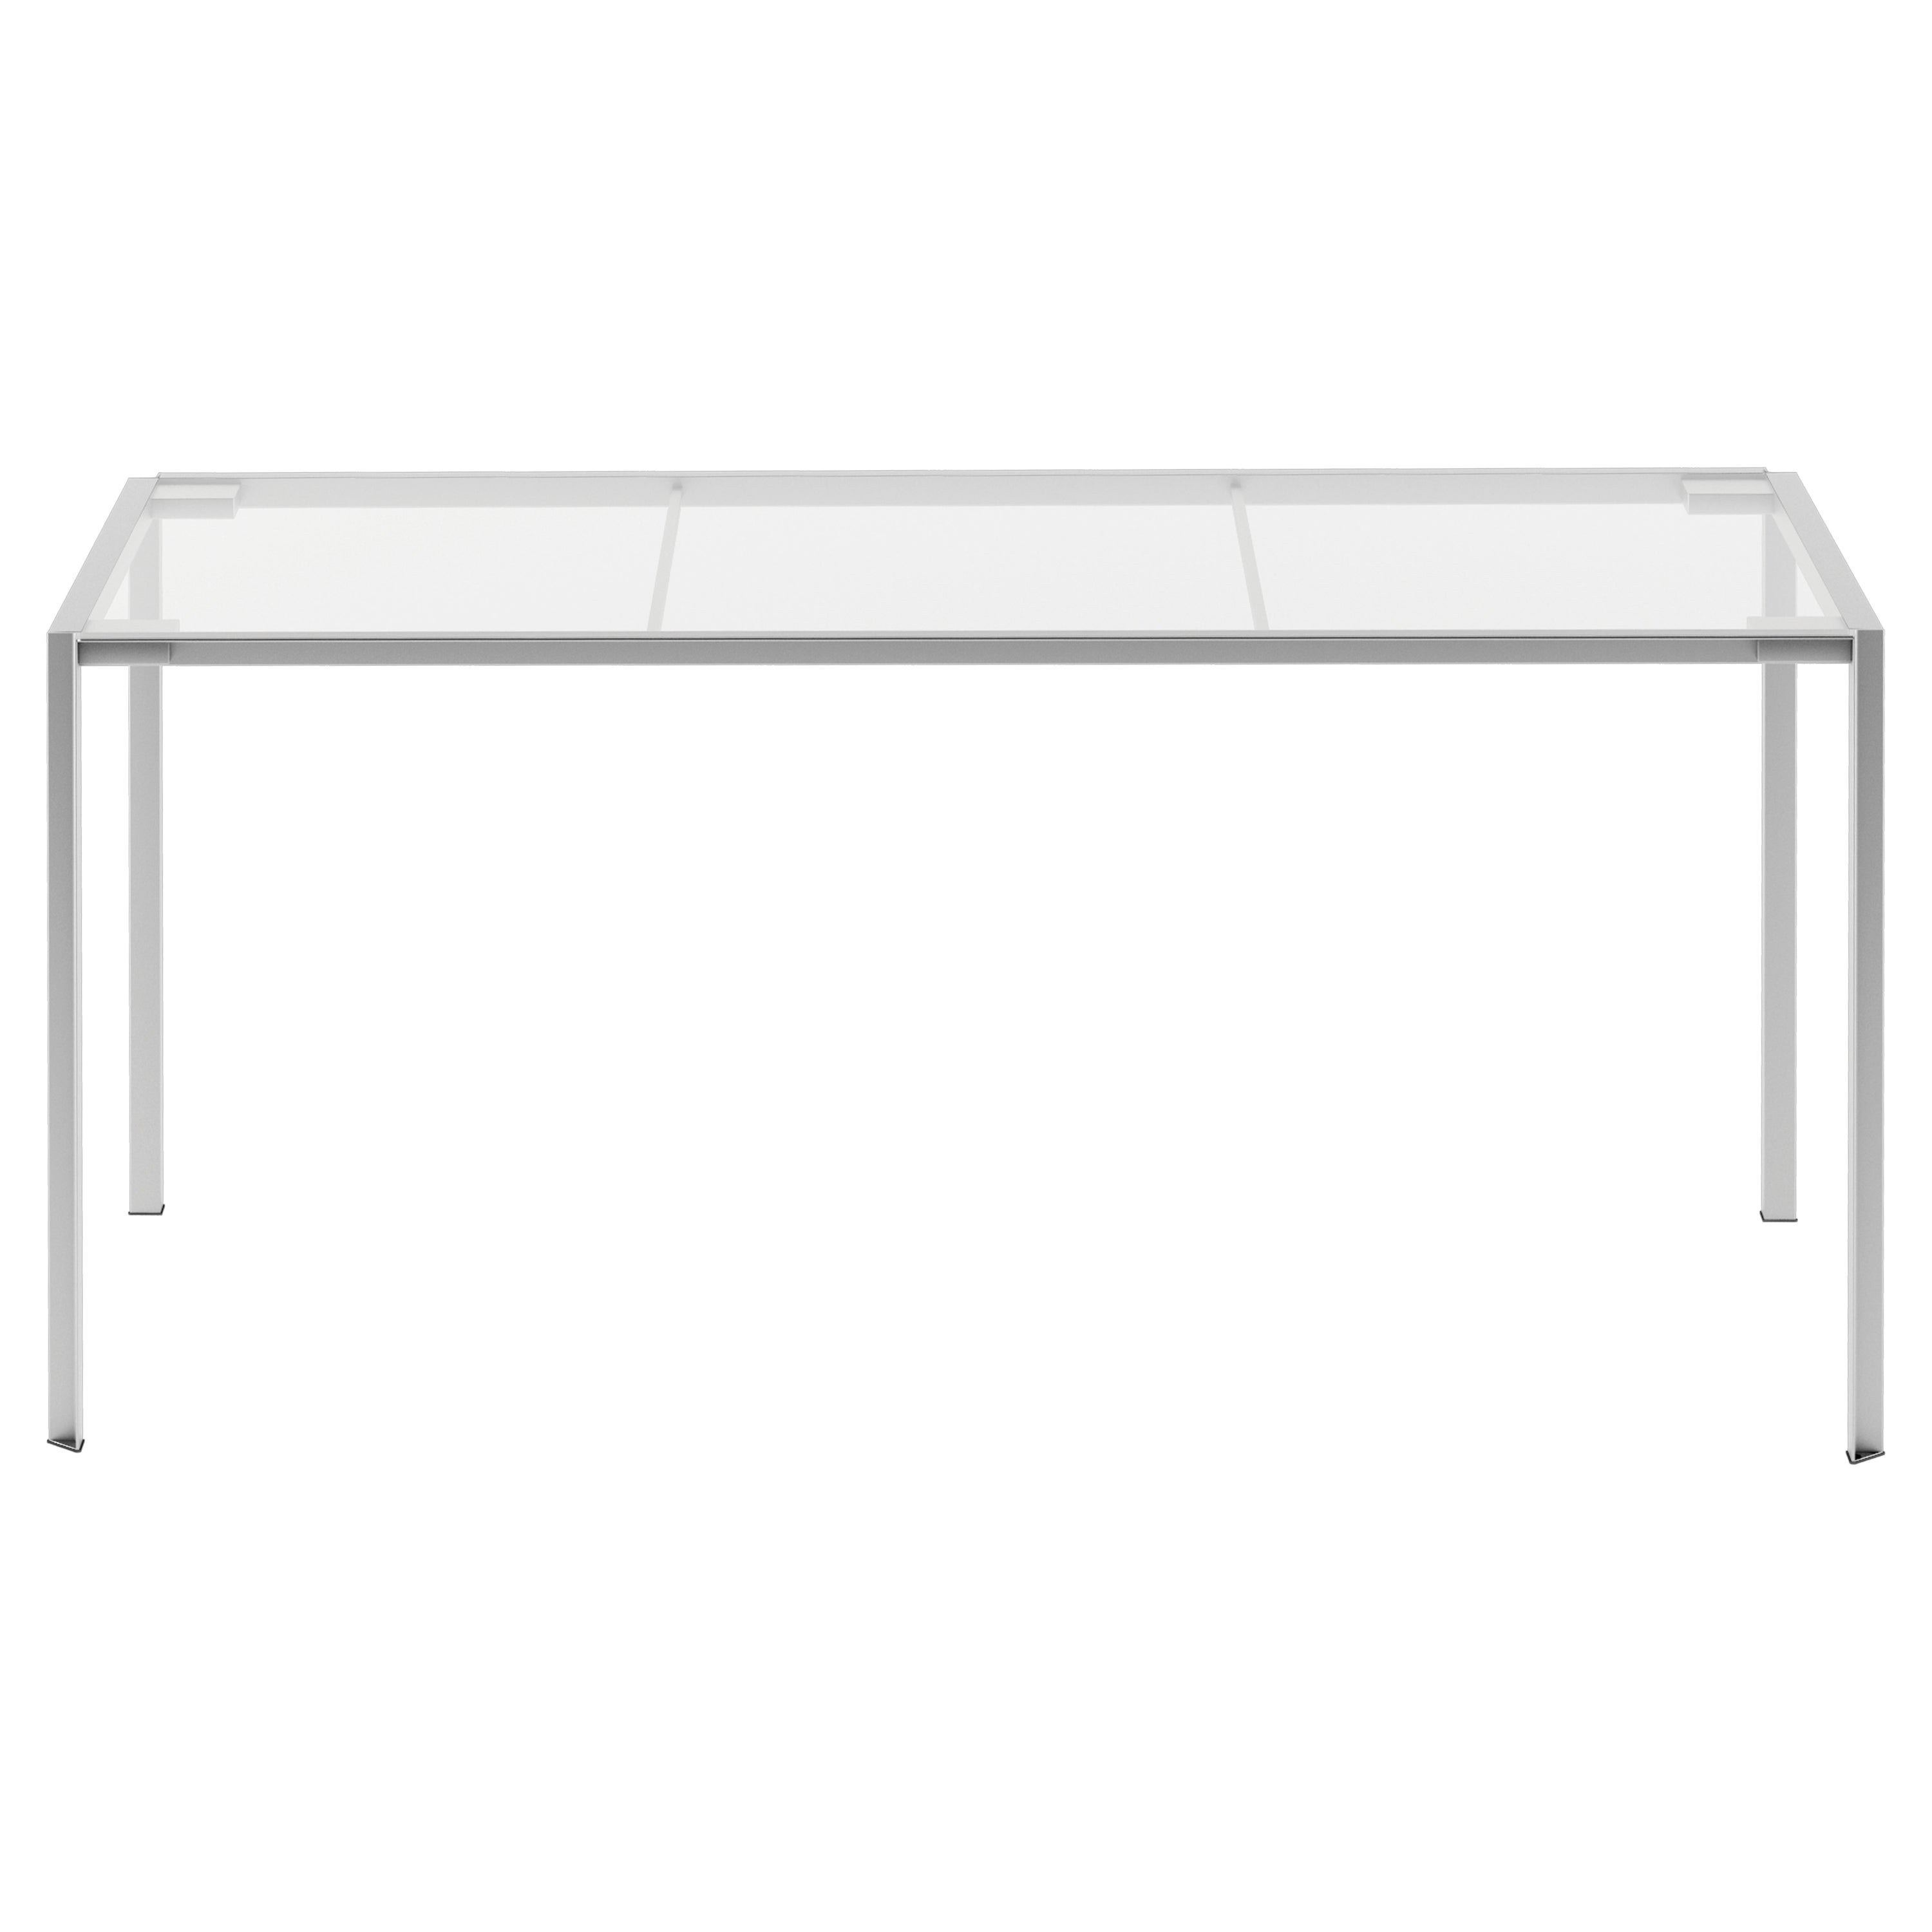 Alias 218_O Green Table with Brushed Stainless Steel Frame and Glass Top For Sale